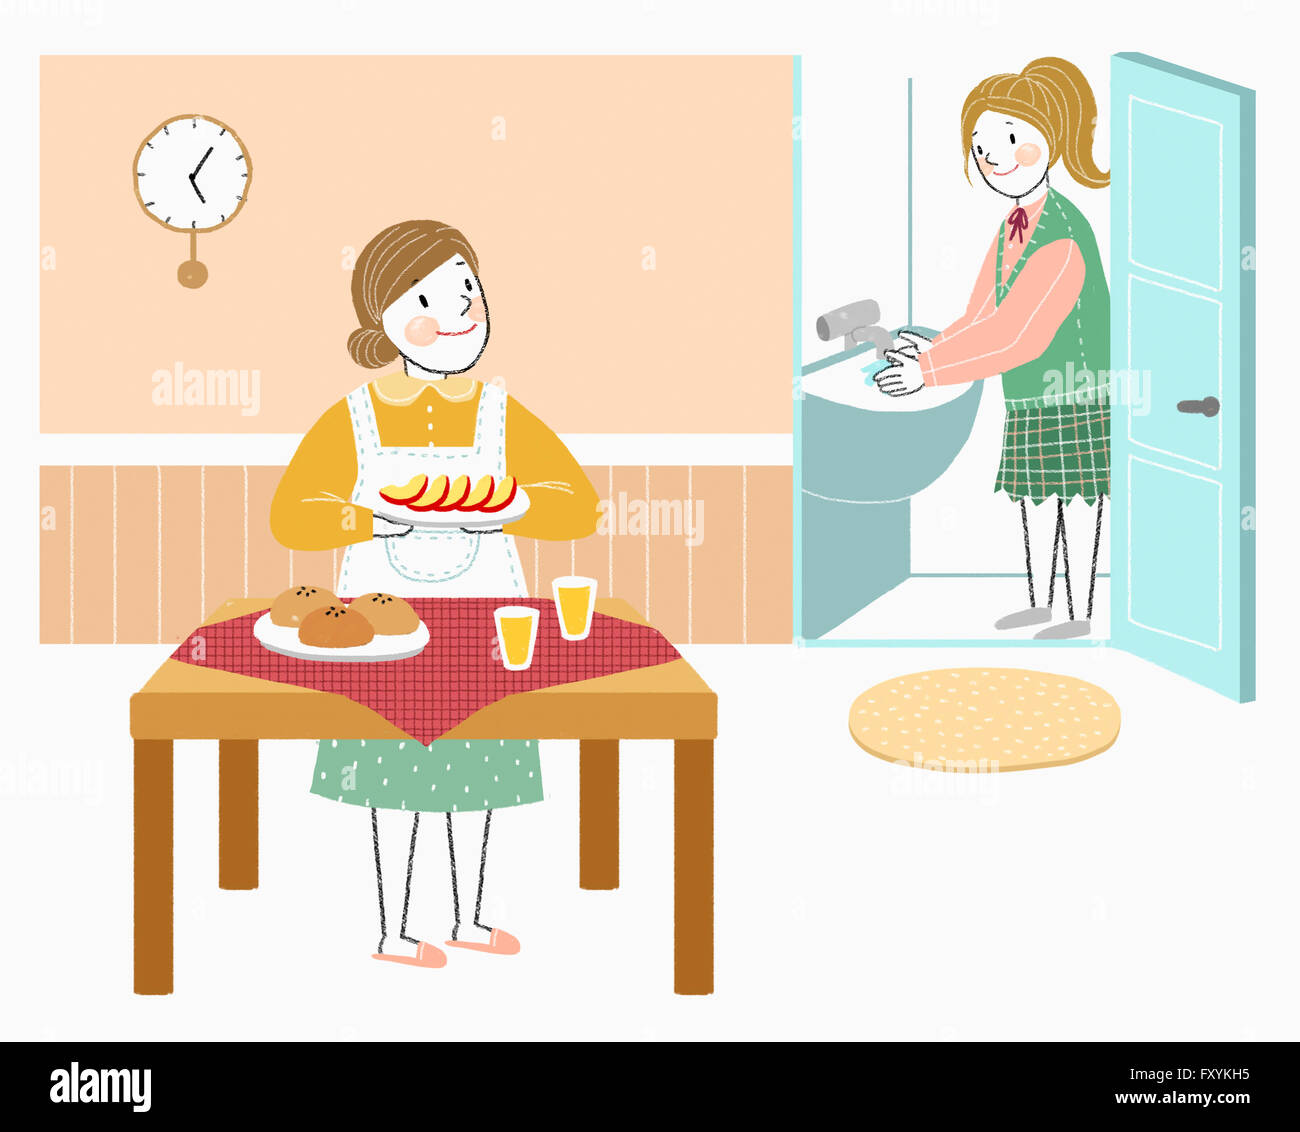 Washing hands before eating in illustration Stock Photo